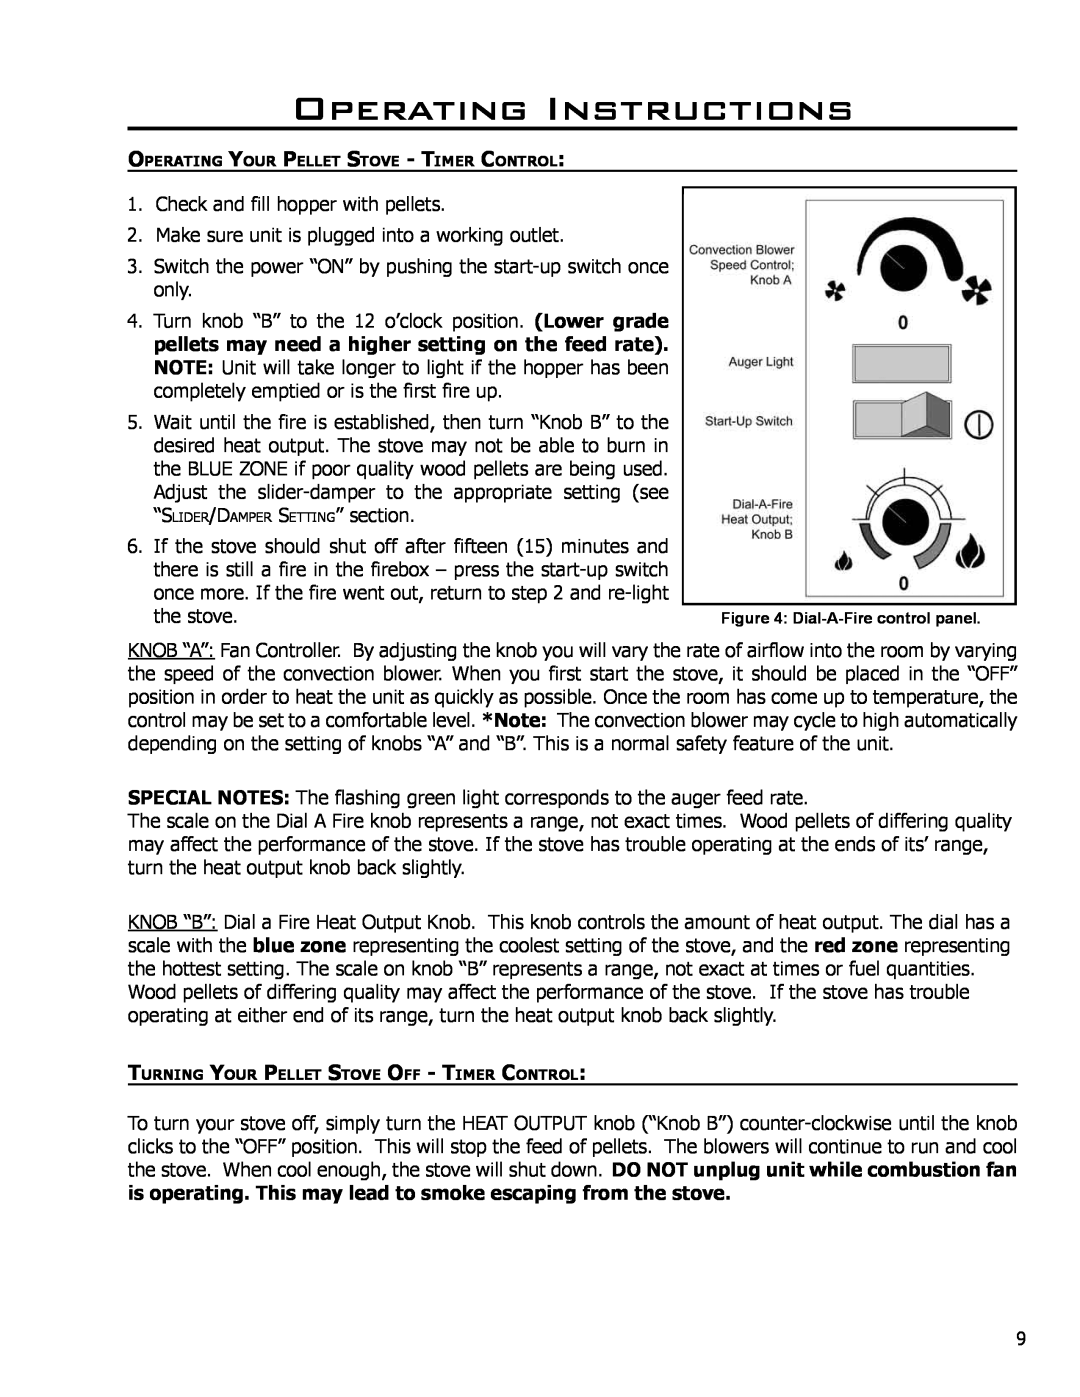 Enviro EF3 owner manual the stove, Operating Instructions 